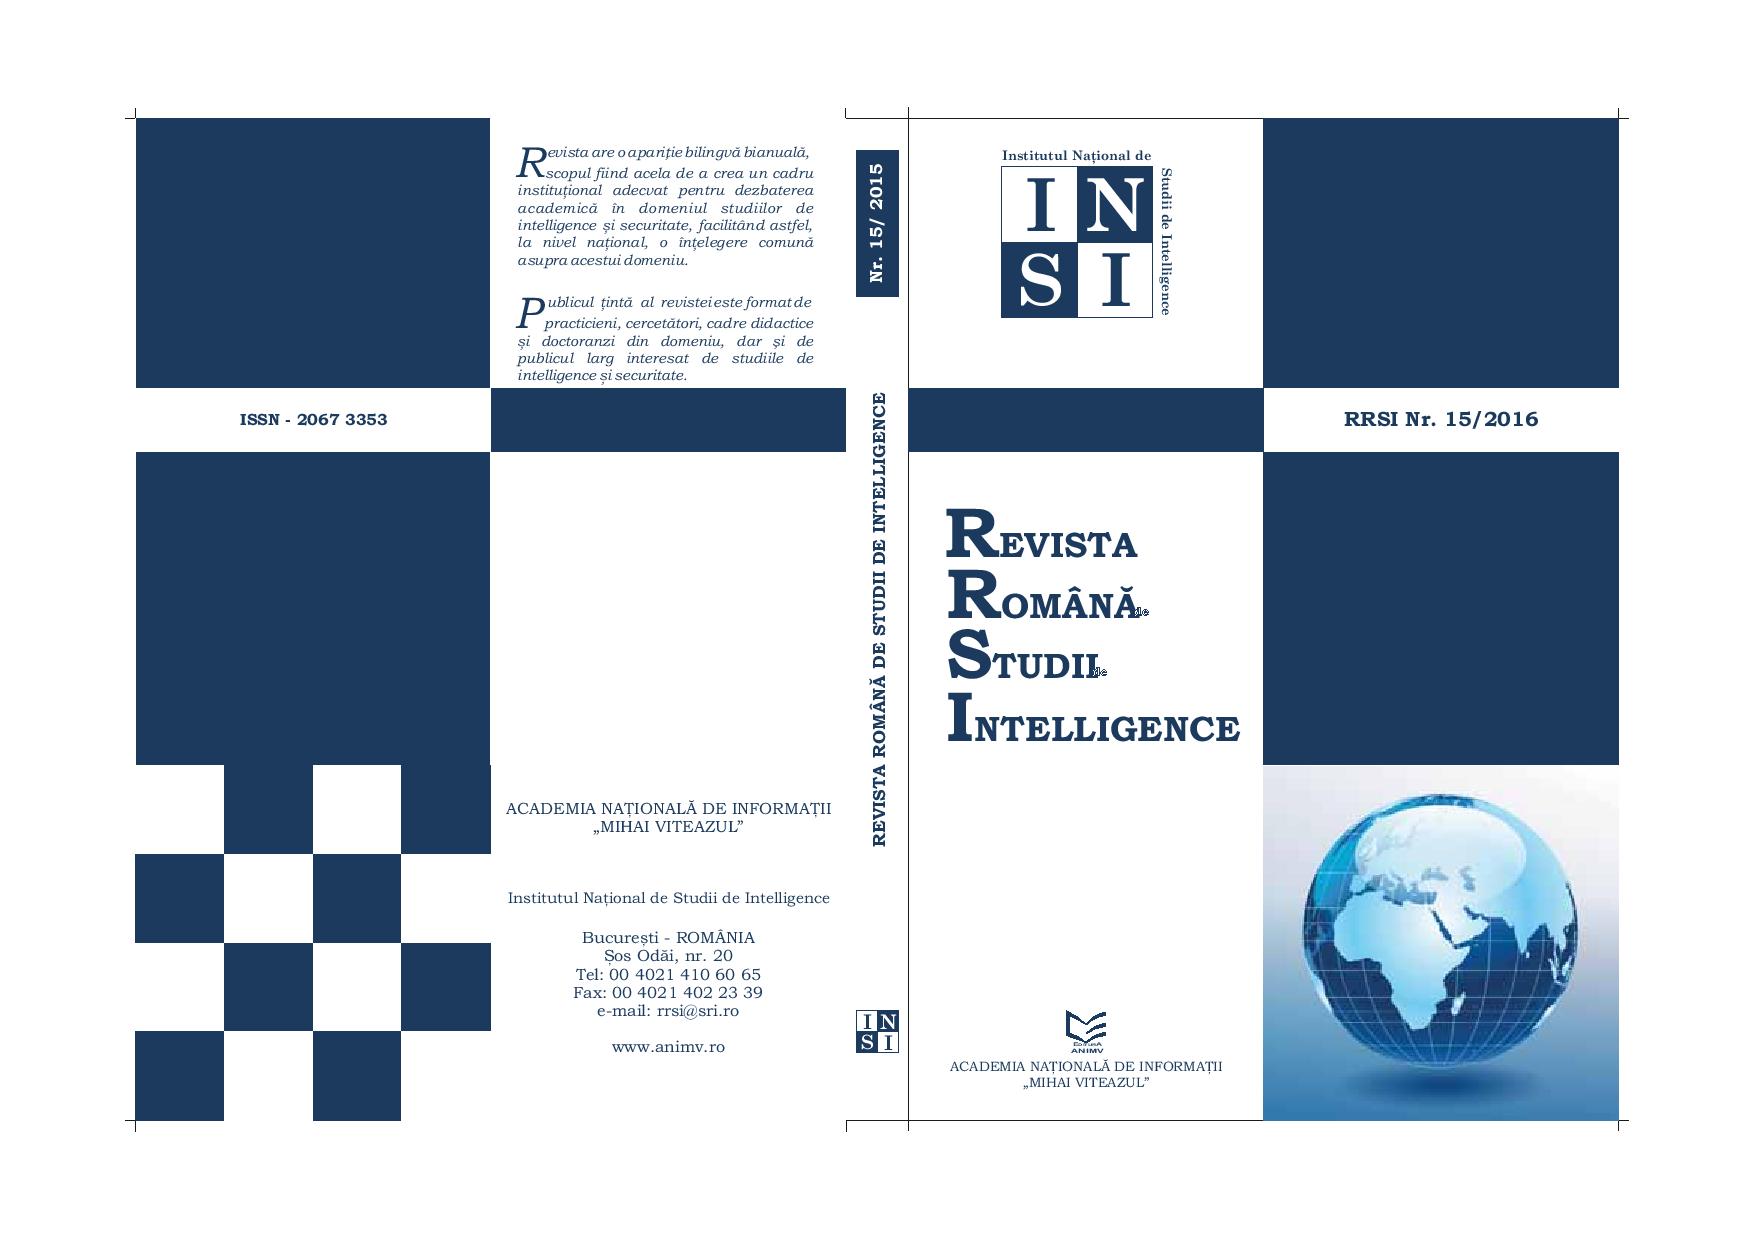 SECURITY STUDIES PROGRAMS’ CONTRIBUTION TO ESTABLISHING THE SECURITY CULTURE OF POST-1989 ROMANIA Cover Image